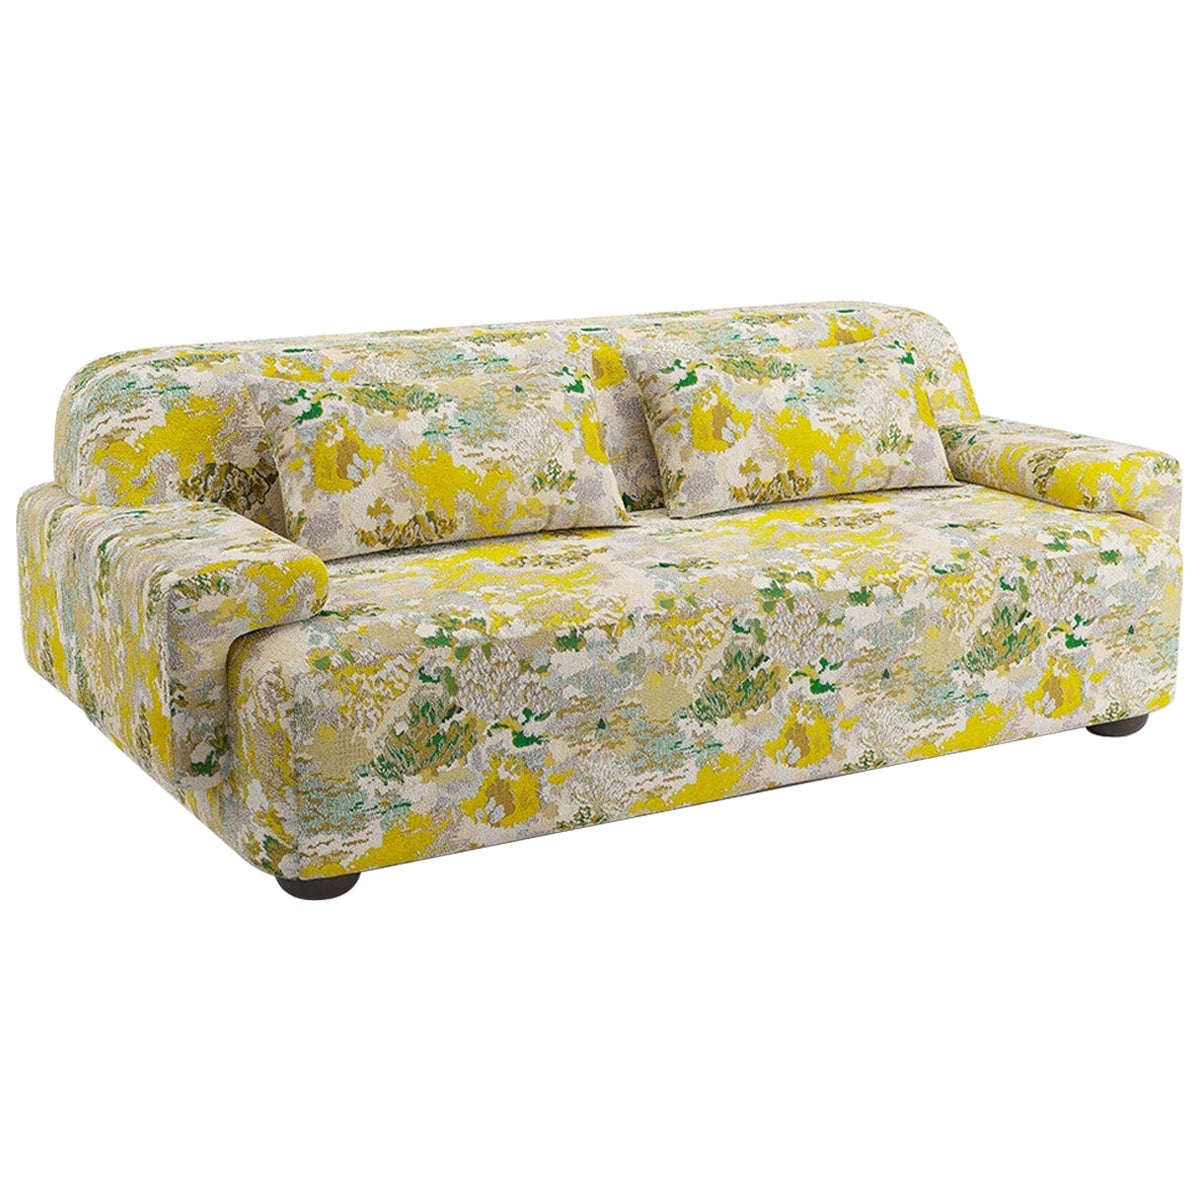 Popus Editions Lena 3 Seater Sofa in Citrine Marrakech Jacquard Upholstery For Sale